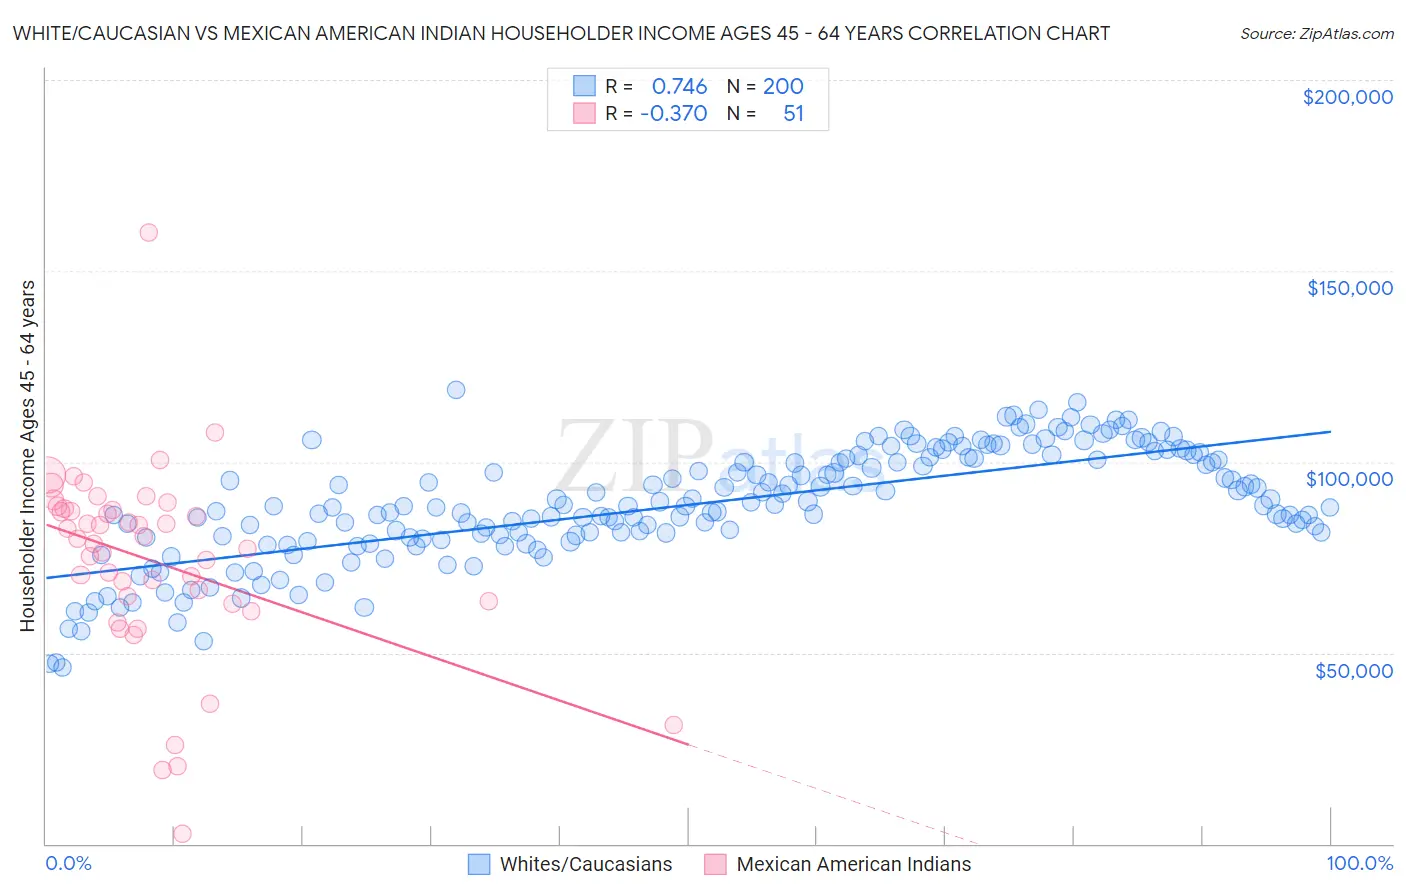 White/Caucasian vs Mexican American Indian Householder Income Ages 45 - 64 years